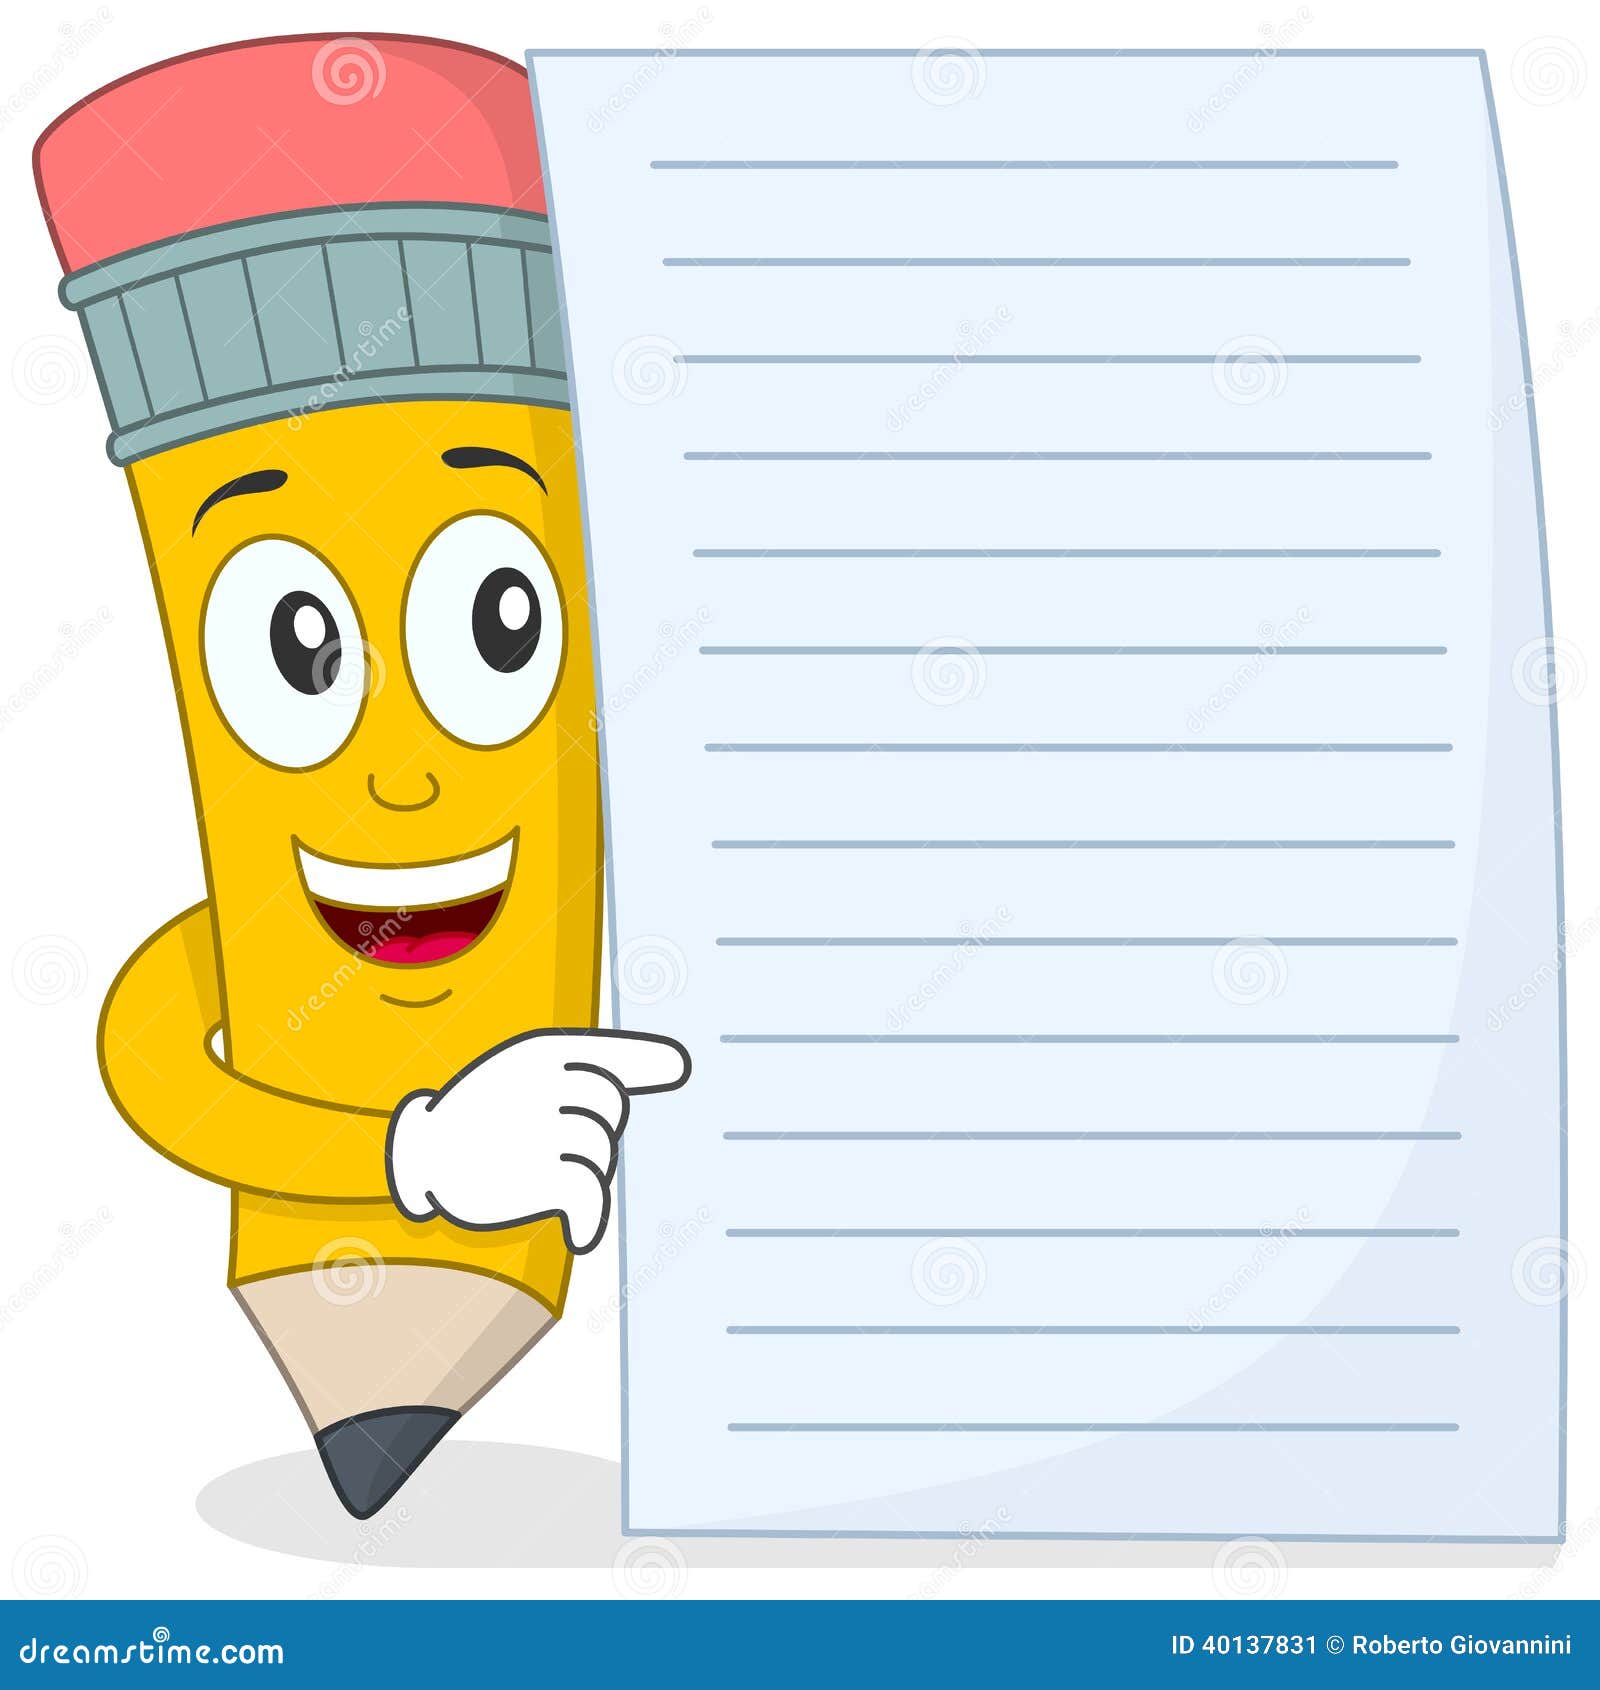 Pencil Character With Blank Paper Stock Vector ...